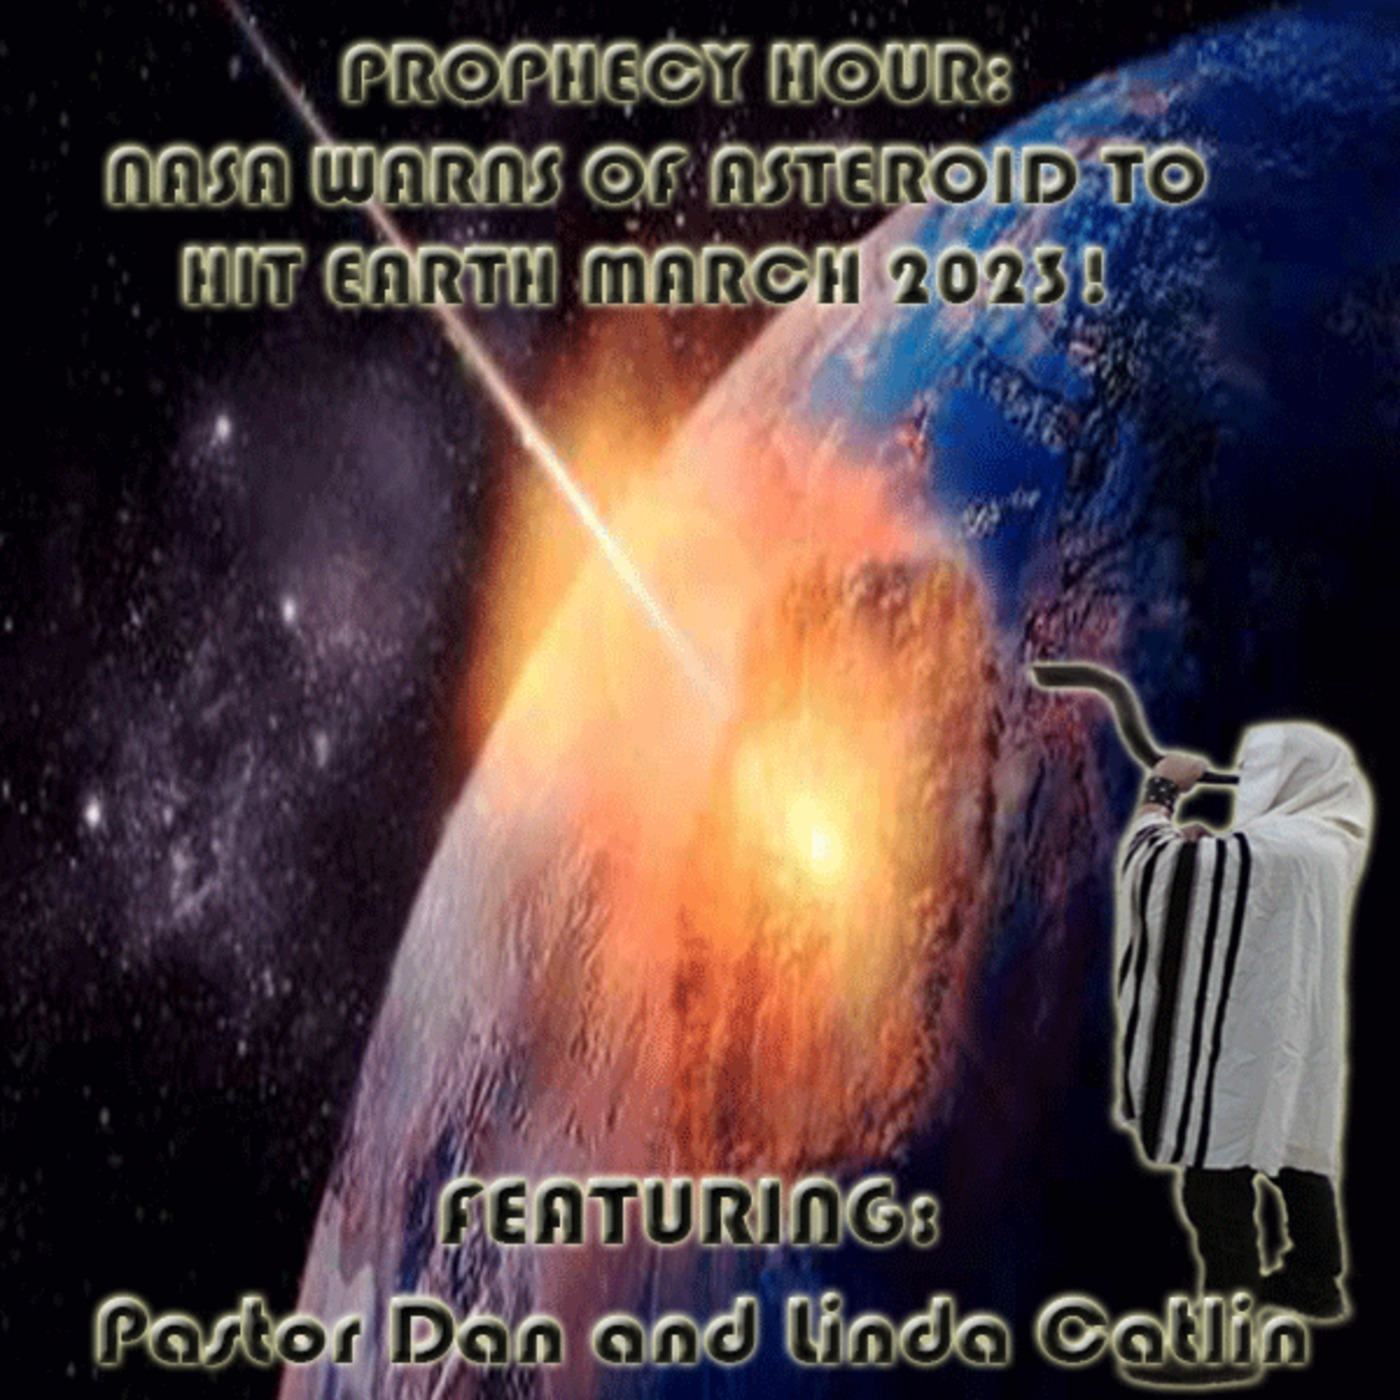 Episode 1154: PROPHECY HOUR: NASA WARNS OF ASTEROID TO HIT EARTH MARCH 2023!